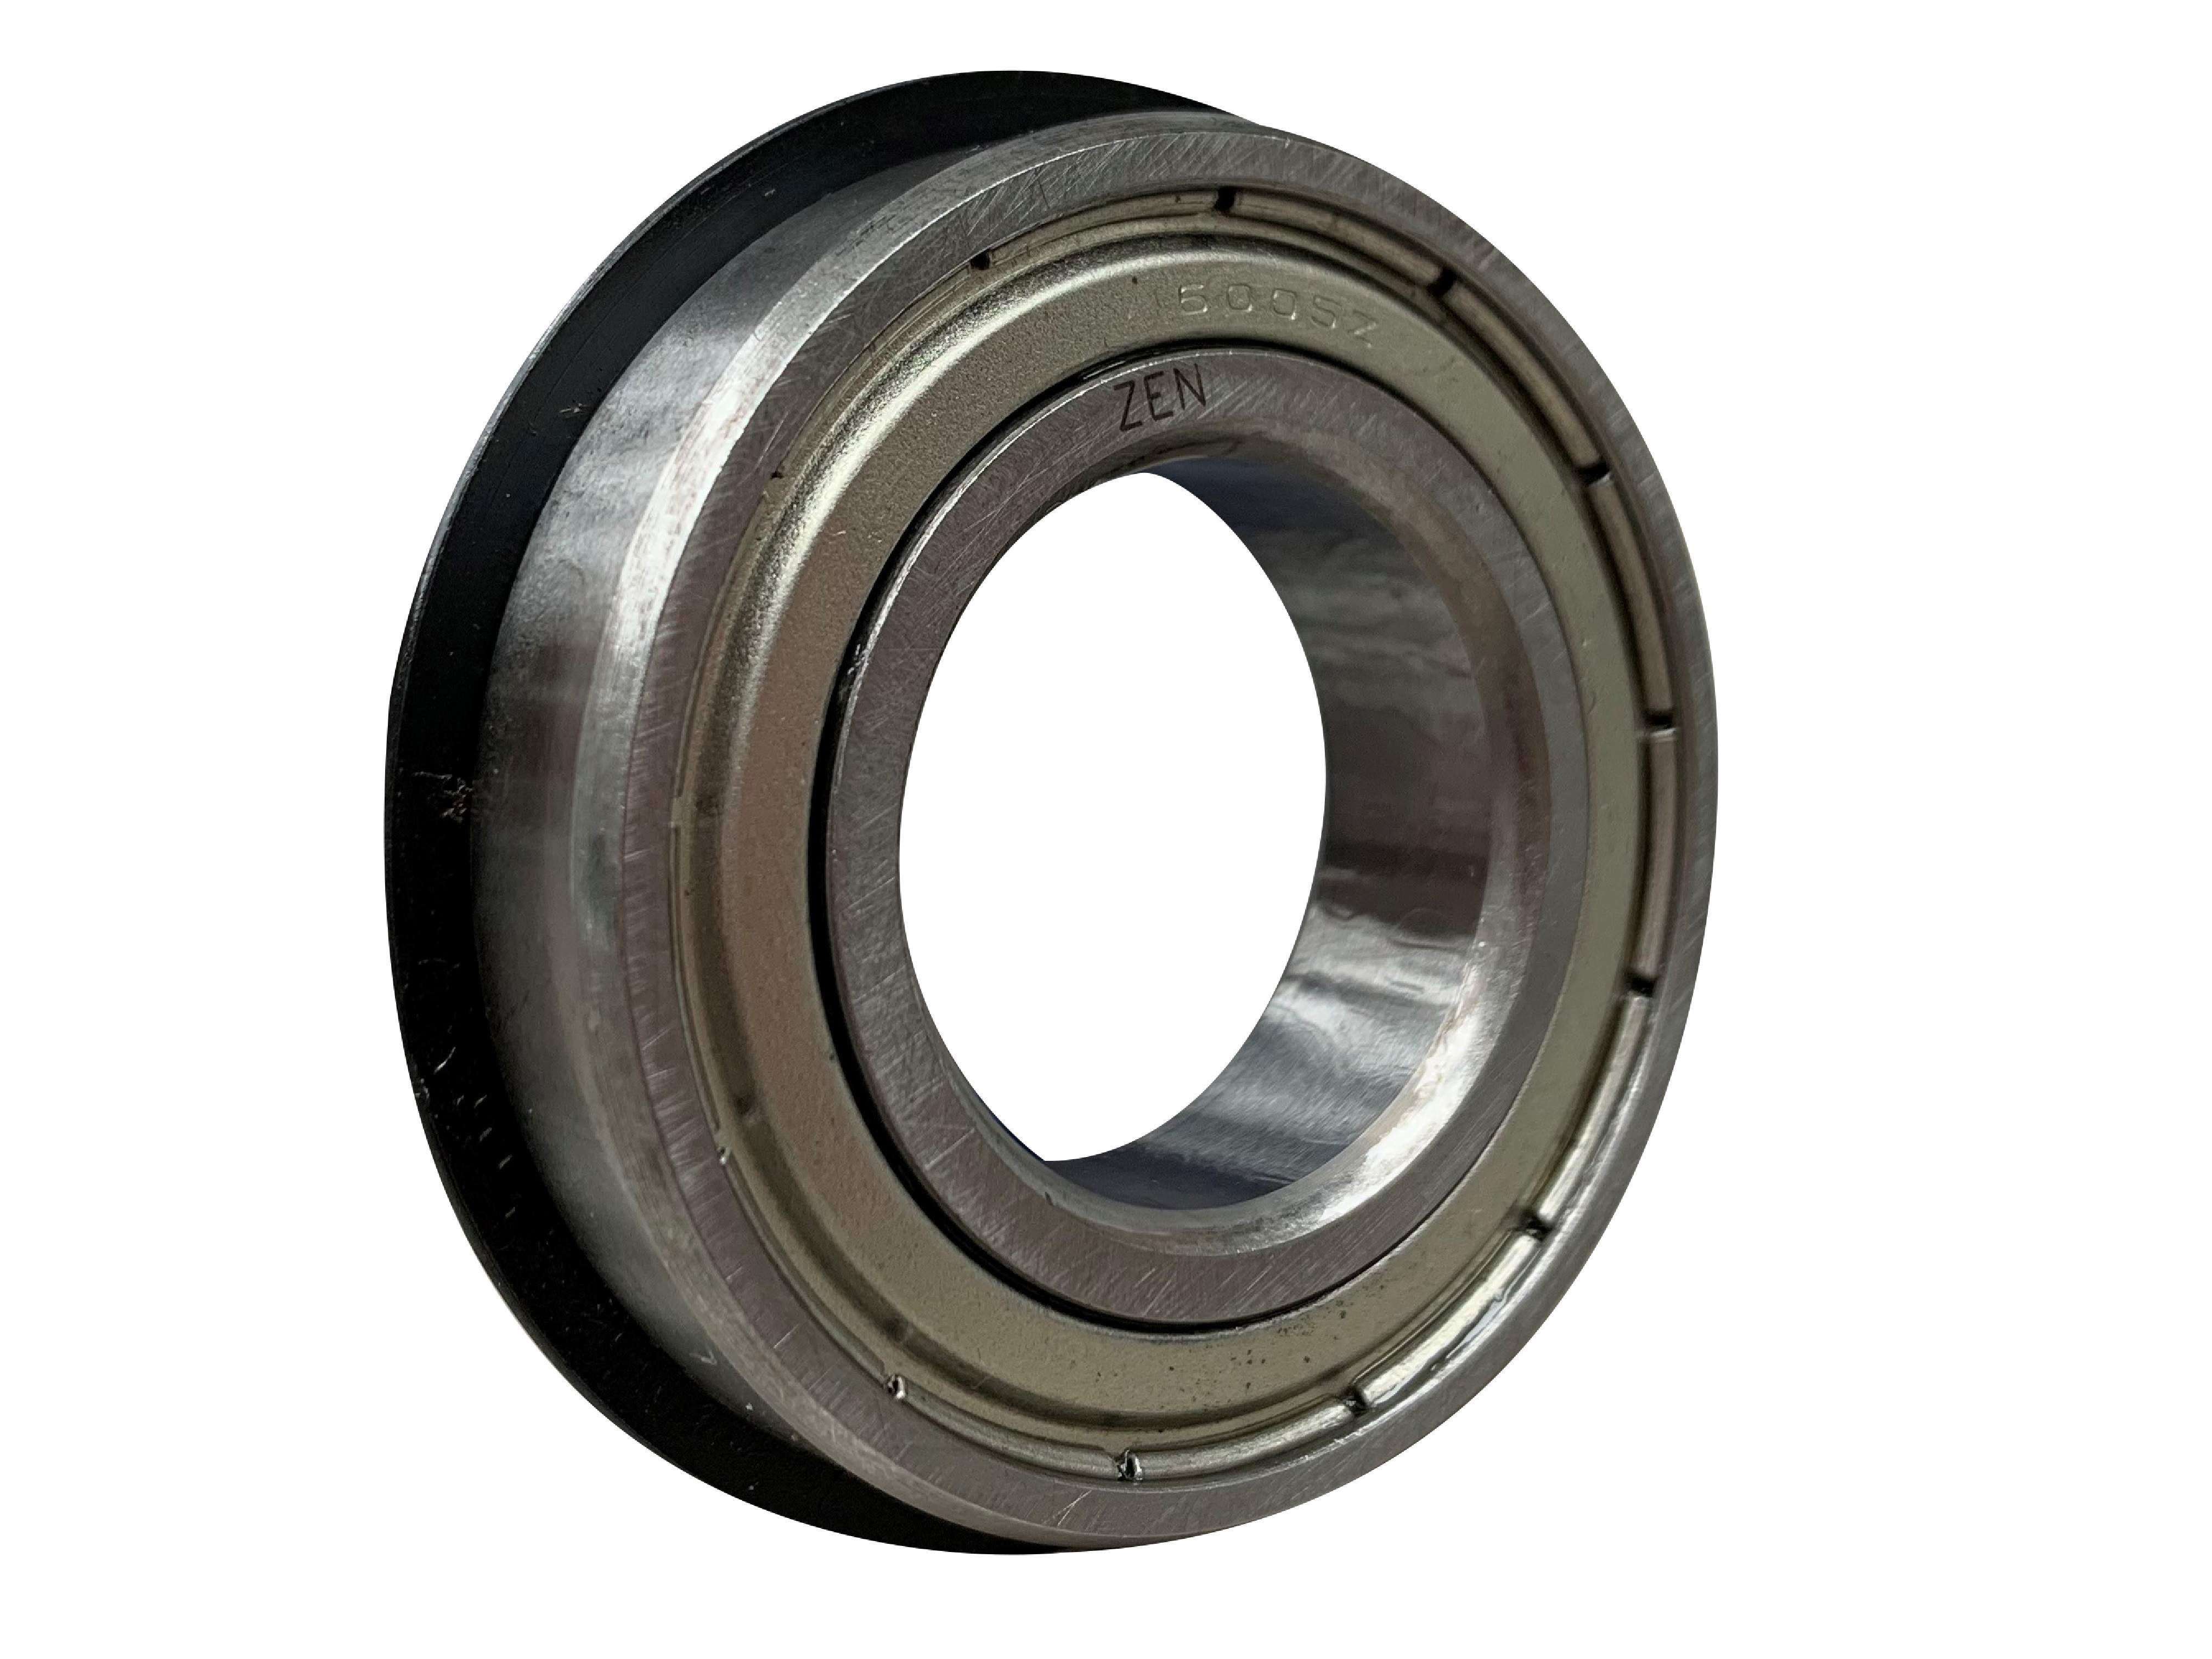 ZEN 6201-2Z-NR Shielded Ball Bearing With Snap Ring 12mm x 32mm x 10mm